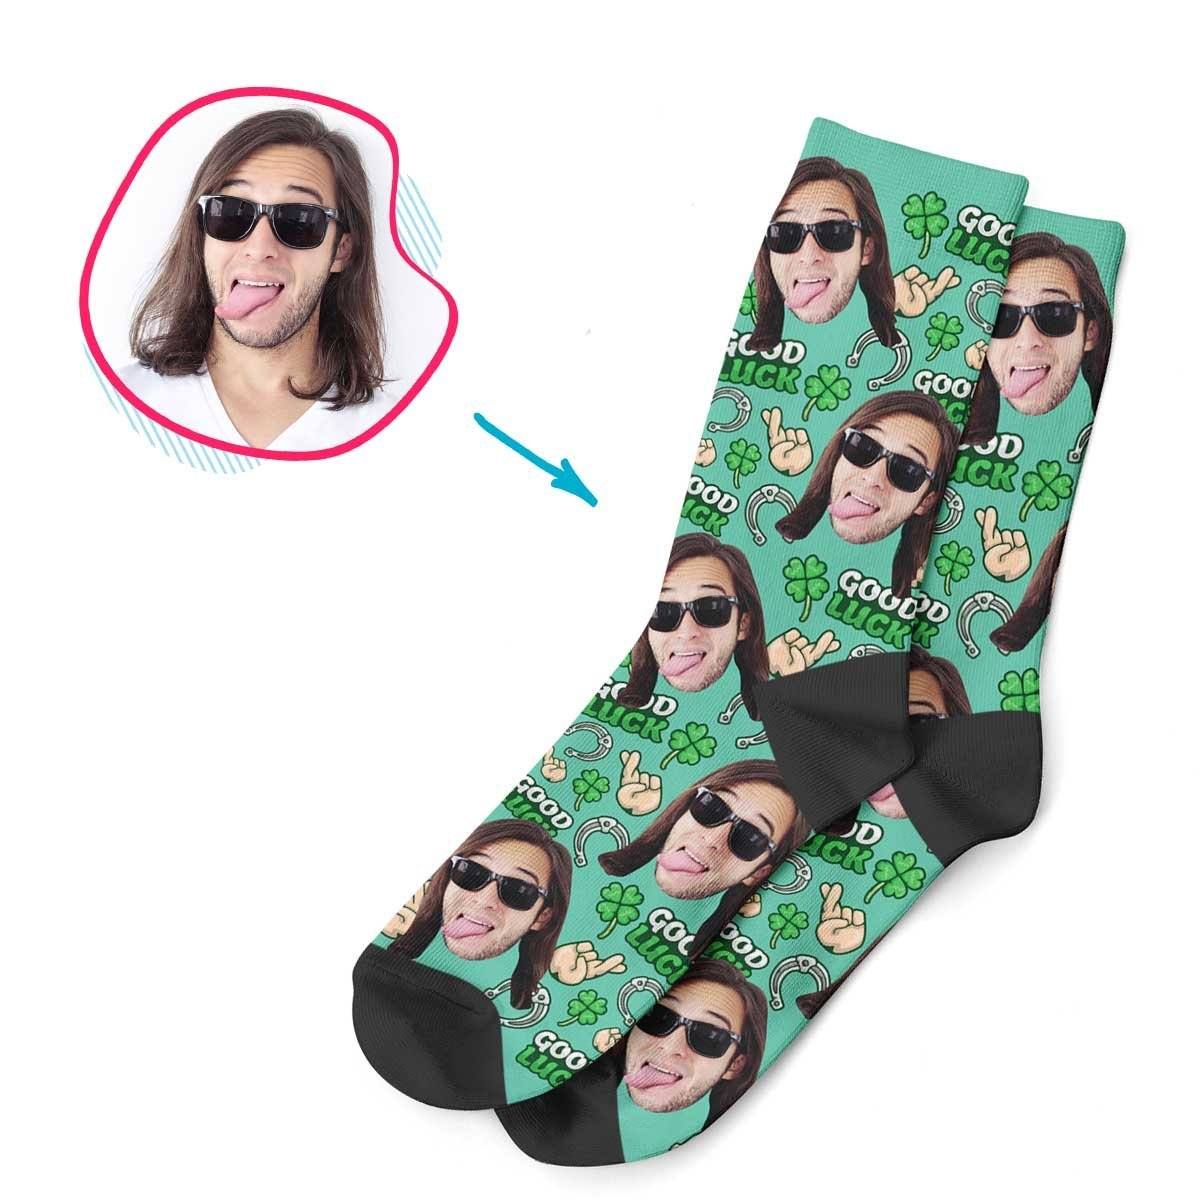 Mint Good Luck personalized socks with photo of face printed on them